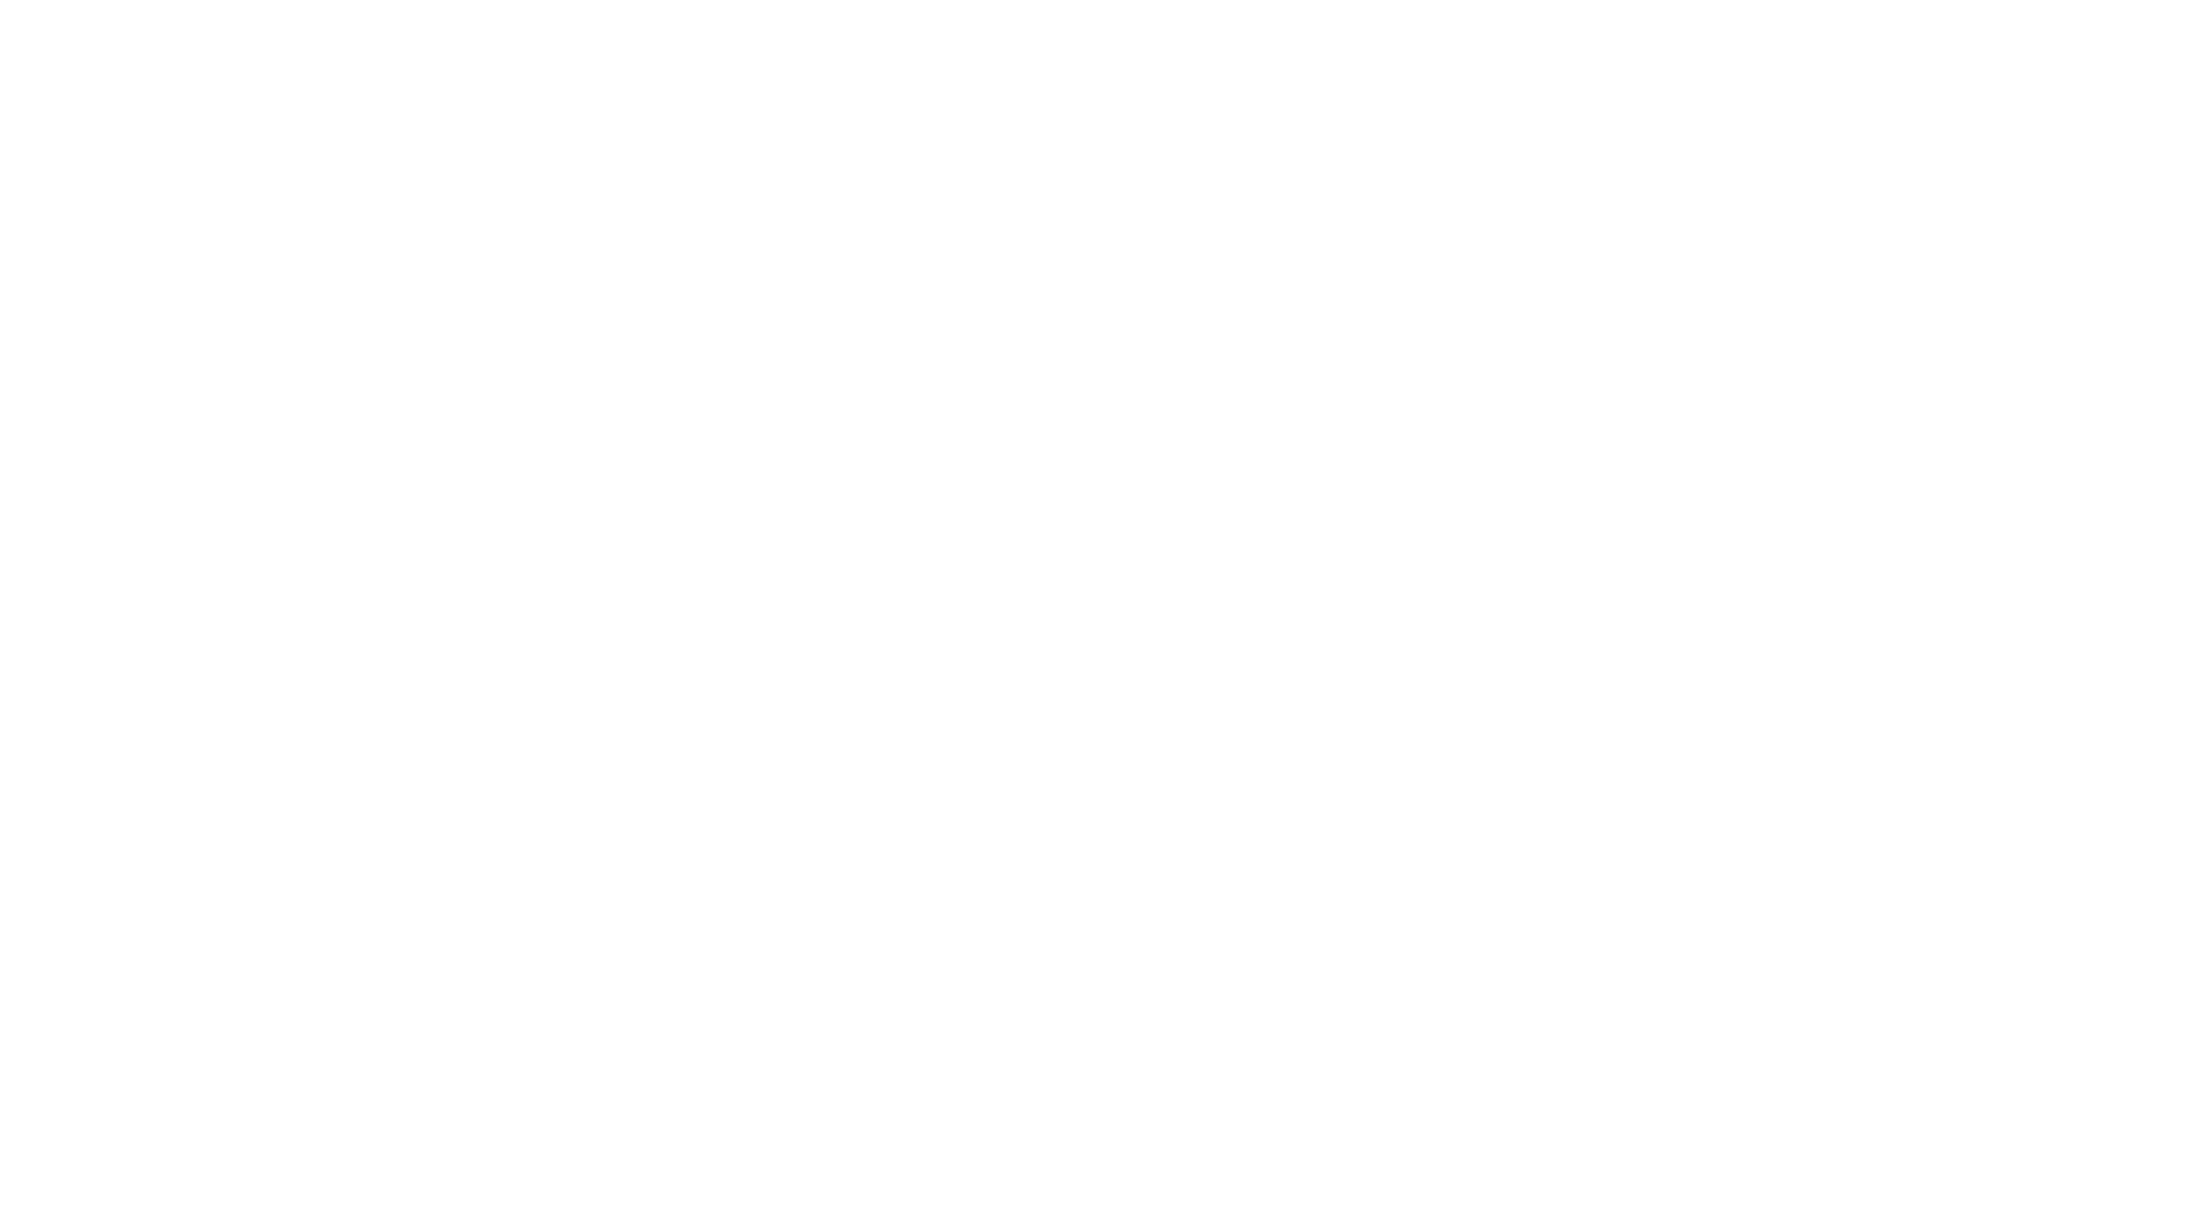 After Parties for Northern Kentucky FREE Festival - July 8th & 9th